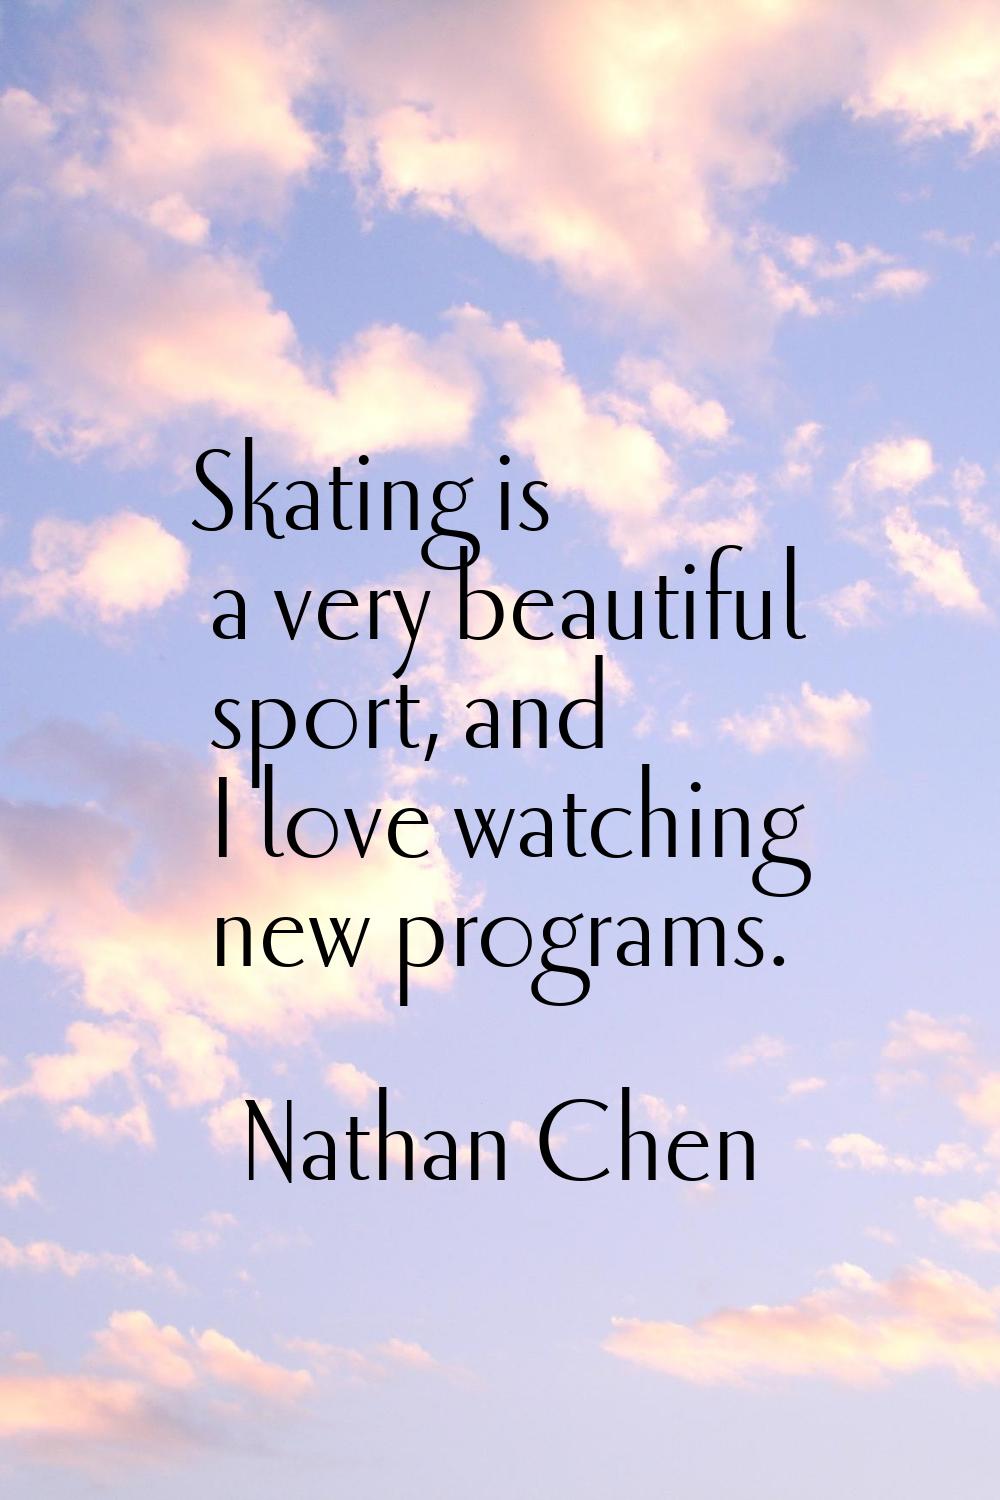 Skating is a very beautiful sport, and I love watching new programs.